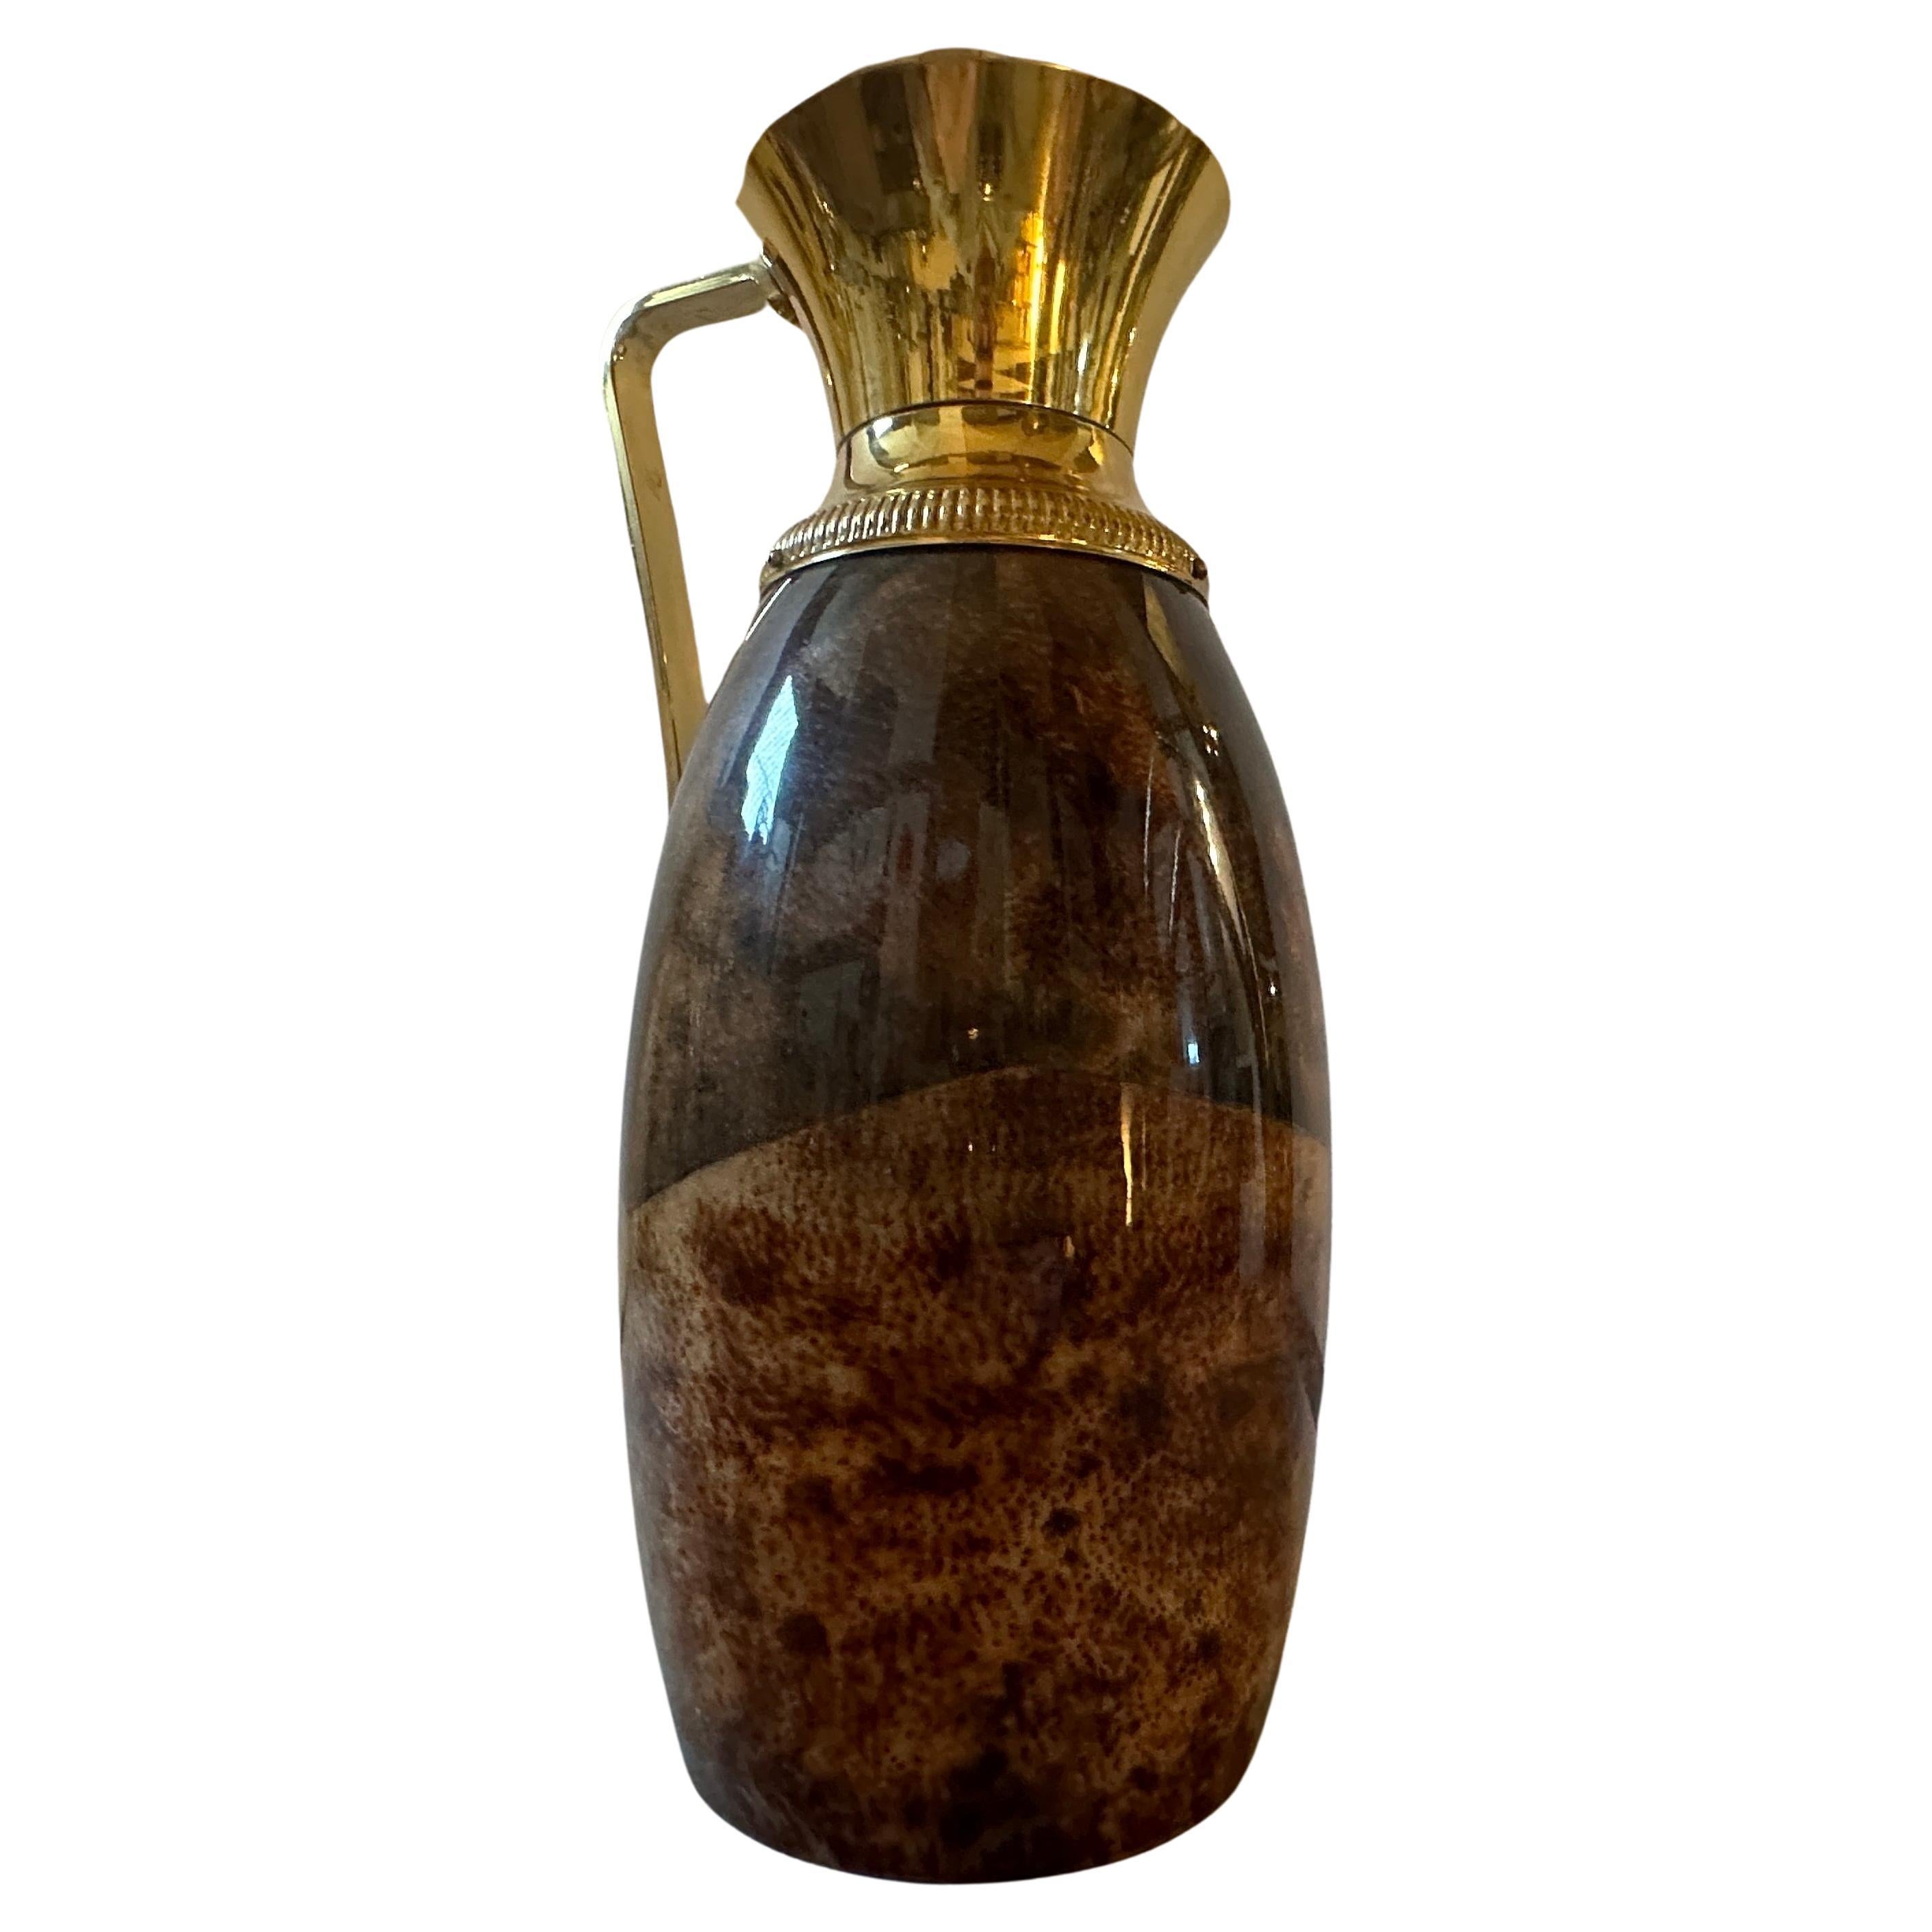 A thermos carafe designed by Aldo Tura, it has been manufactured in Milano in the Fifties by Macabo, it's in lovely vintage conditions. A 1950s Mid-Century Modern Brown Goatskin and Brass Carafe by Aldo Tura showcases the distinctive design